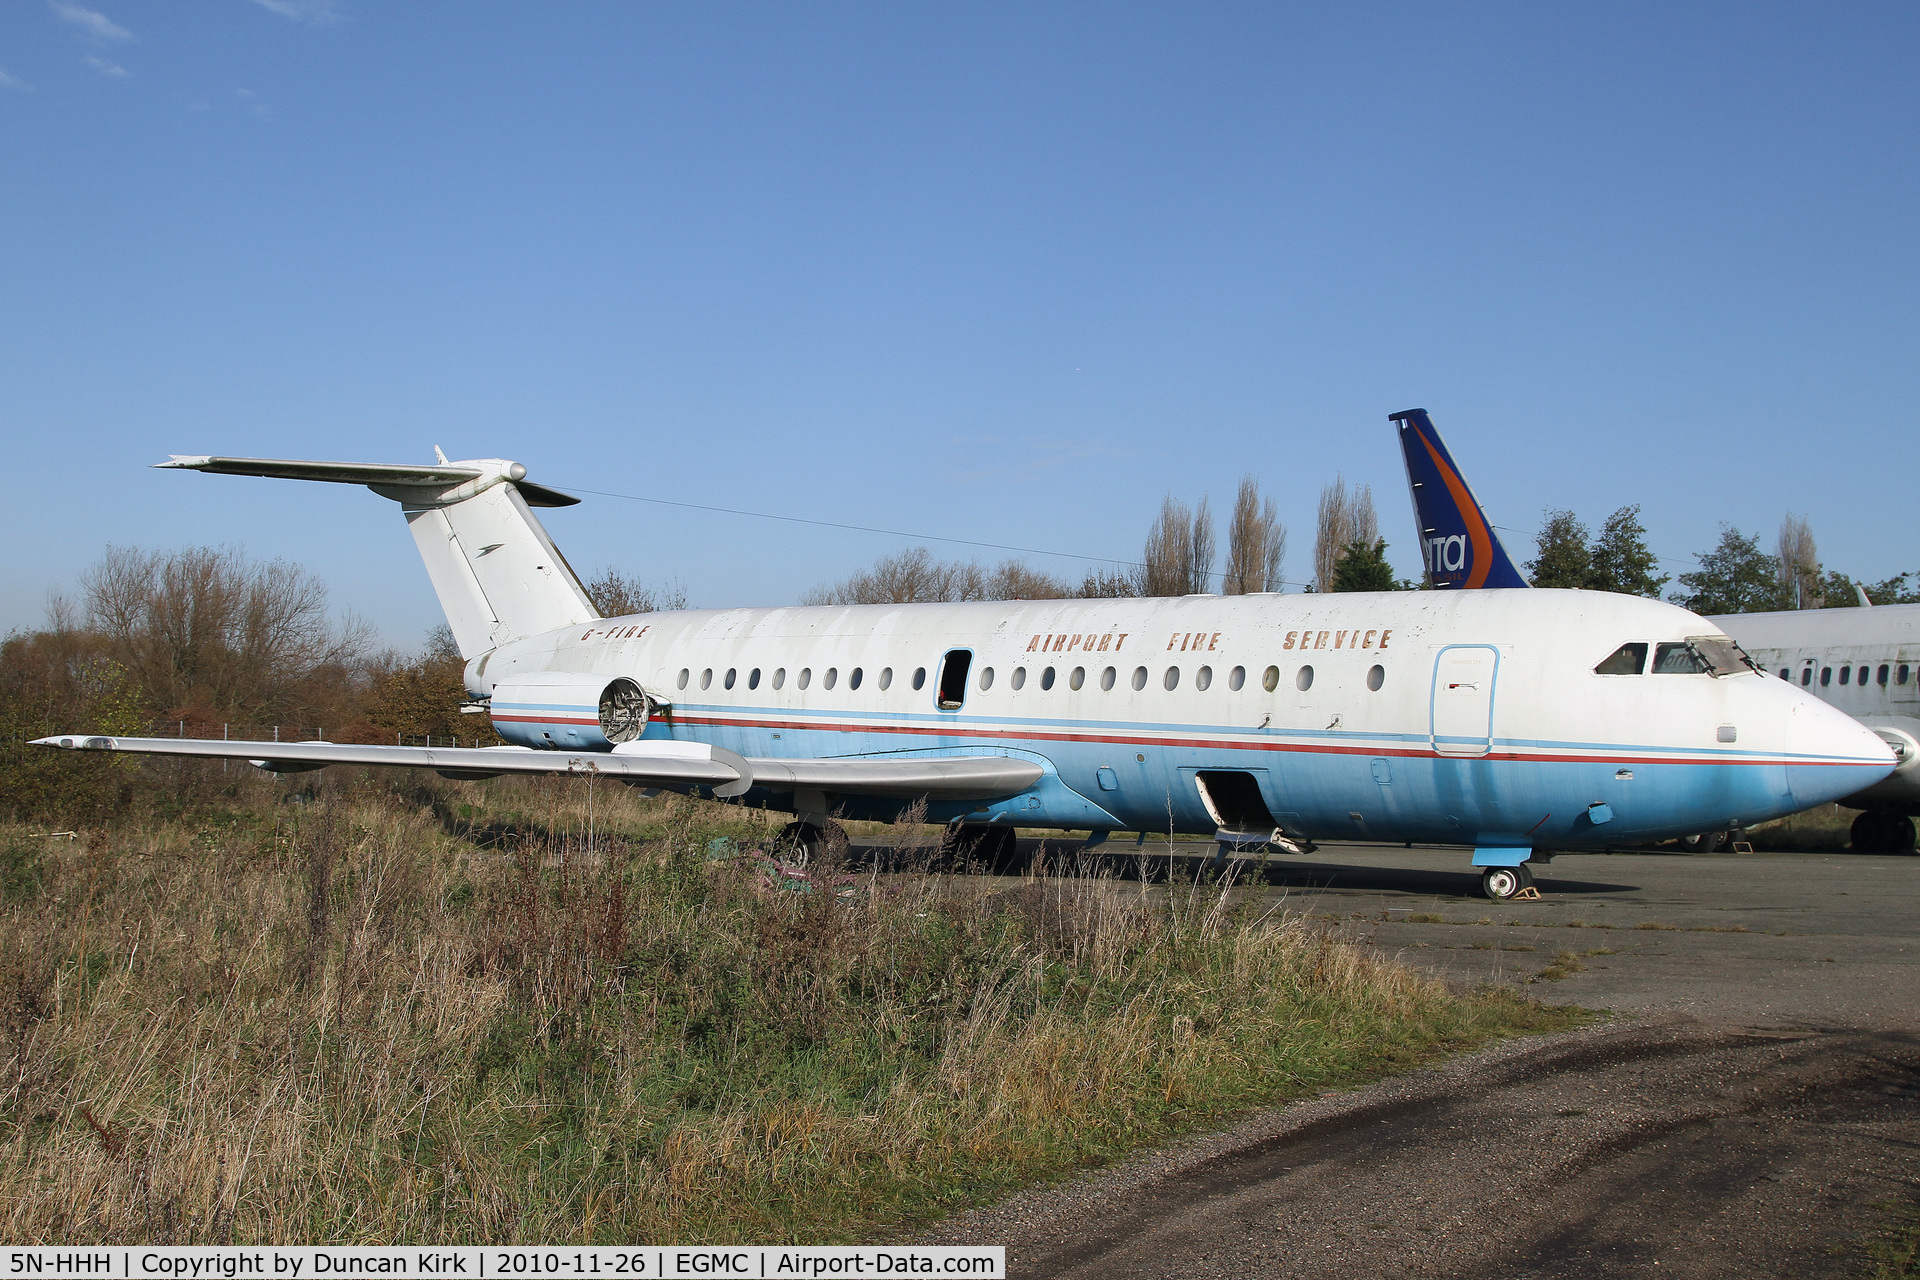 5N-HHH, 1966 BAC 111-401AK One-Eleven C/N BAC.064, Former VIP BAC 1-11 wears G-FIRE but is a candidate for scrapping